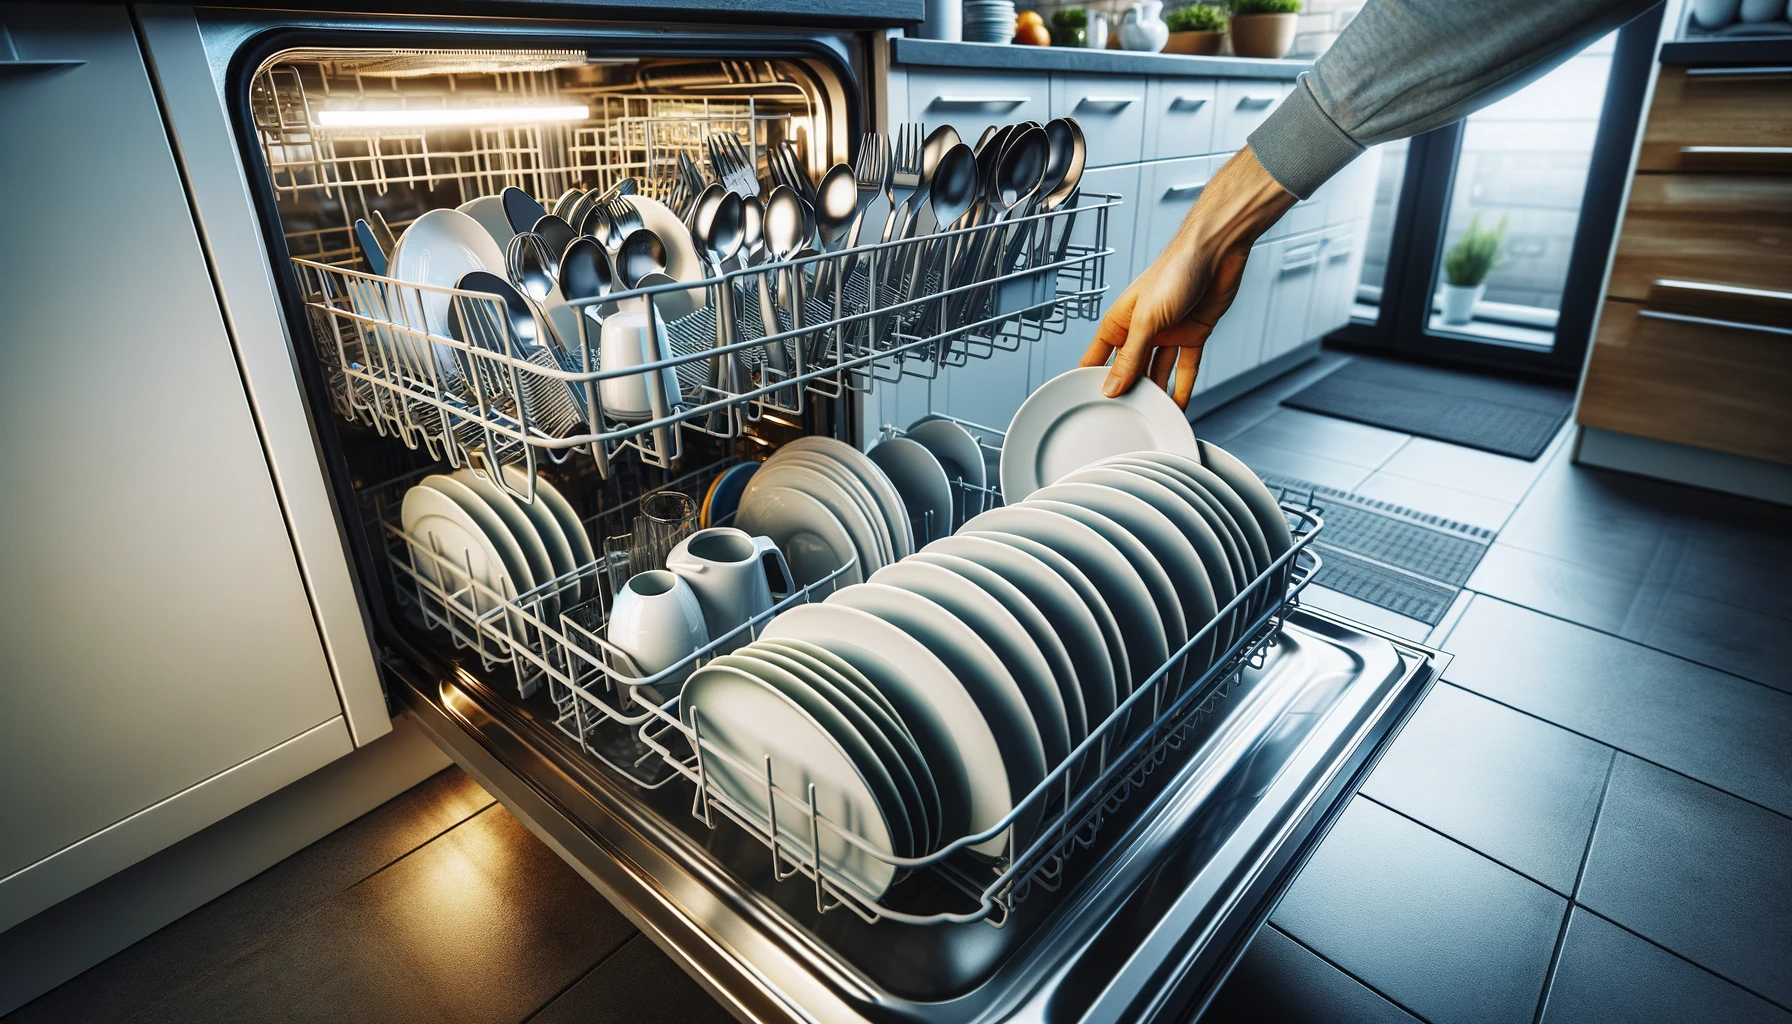 Tips for how to best load your dishwasher